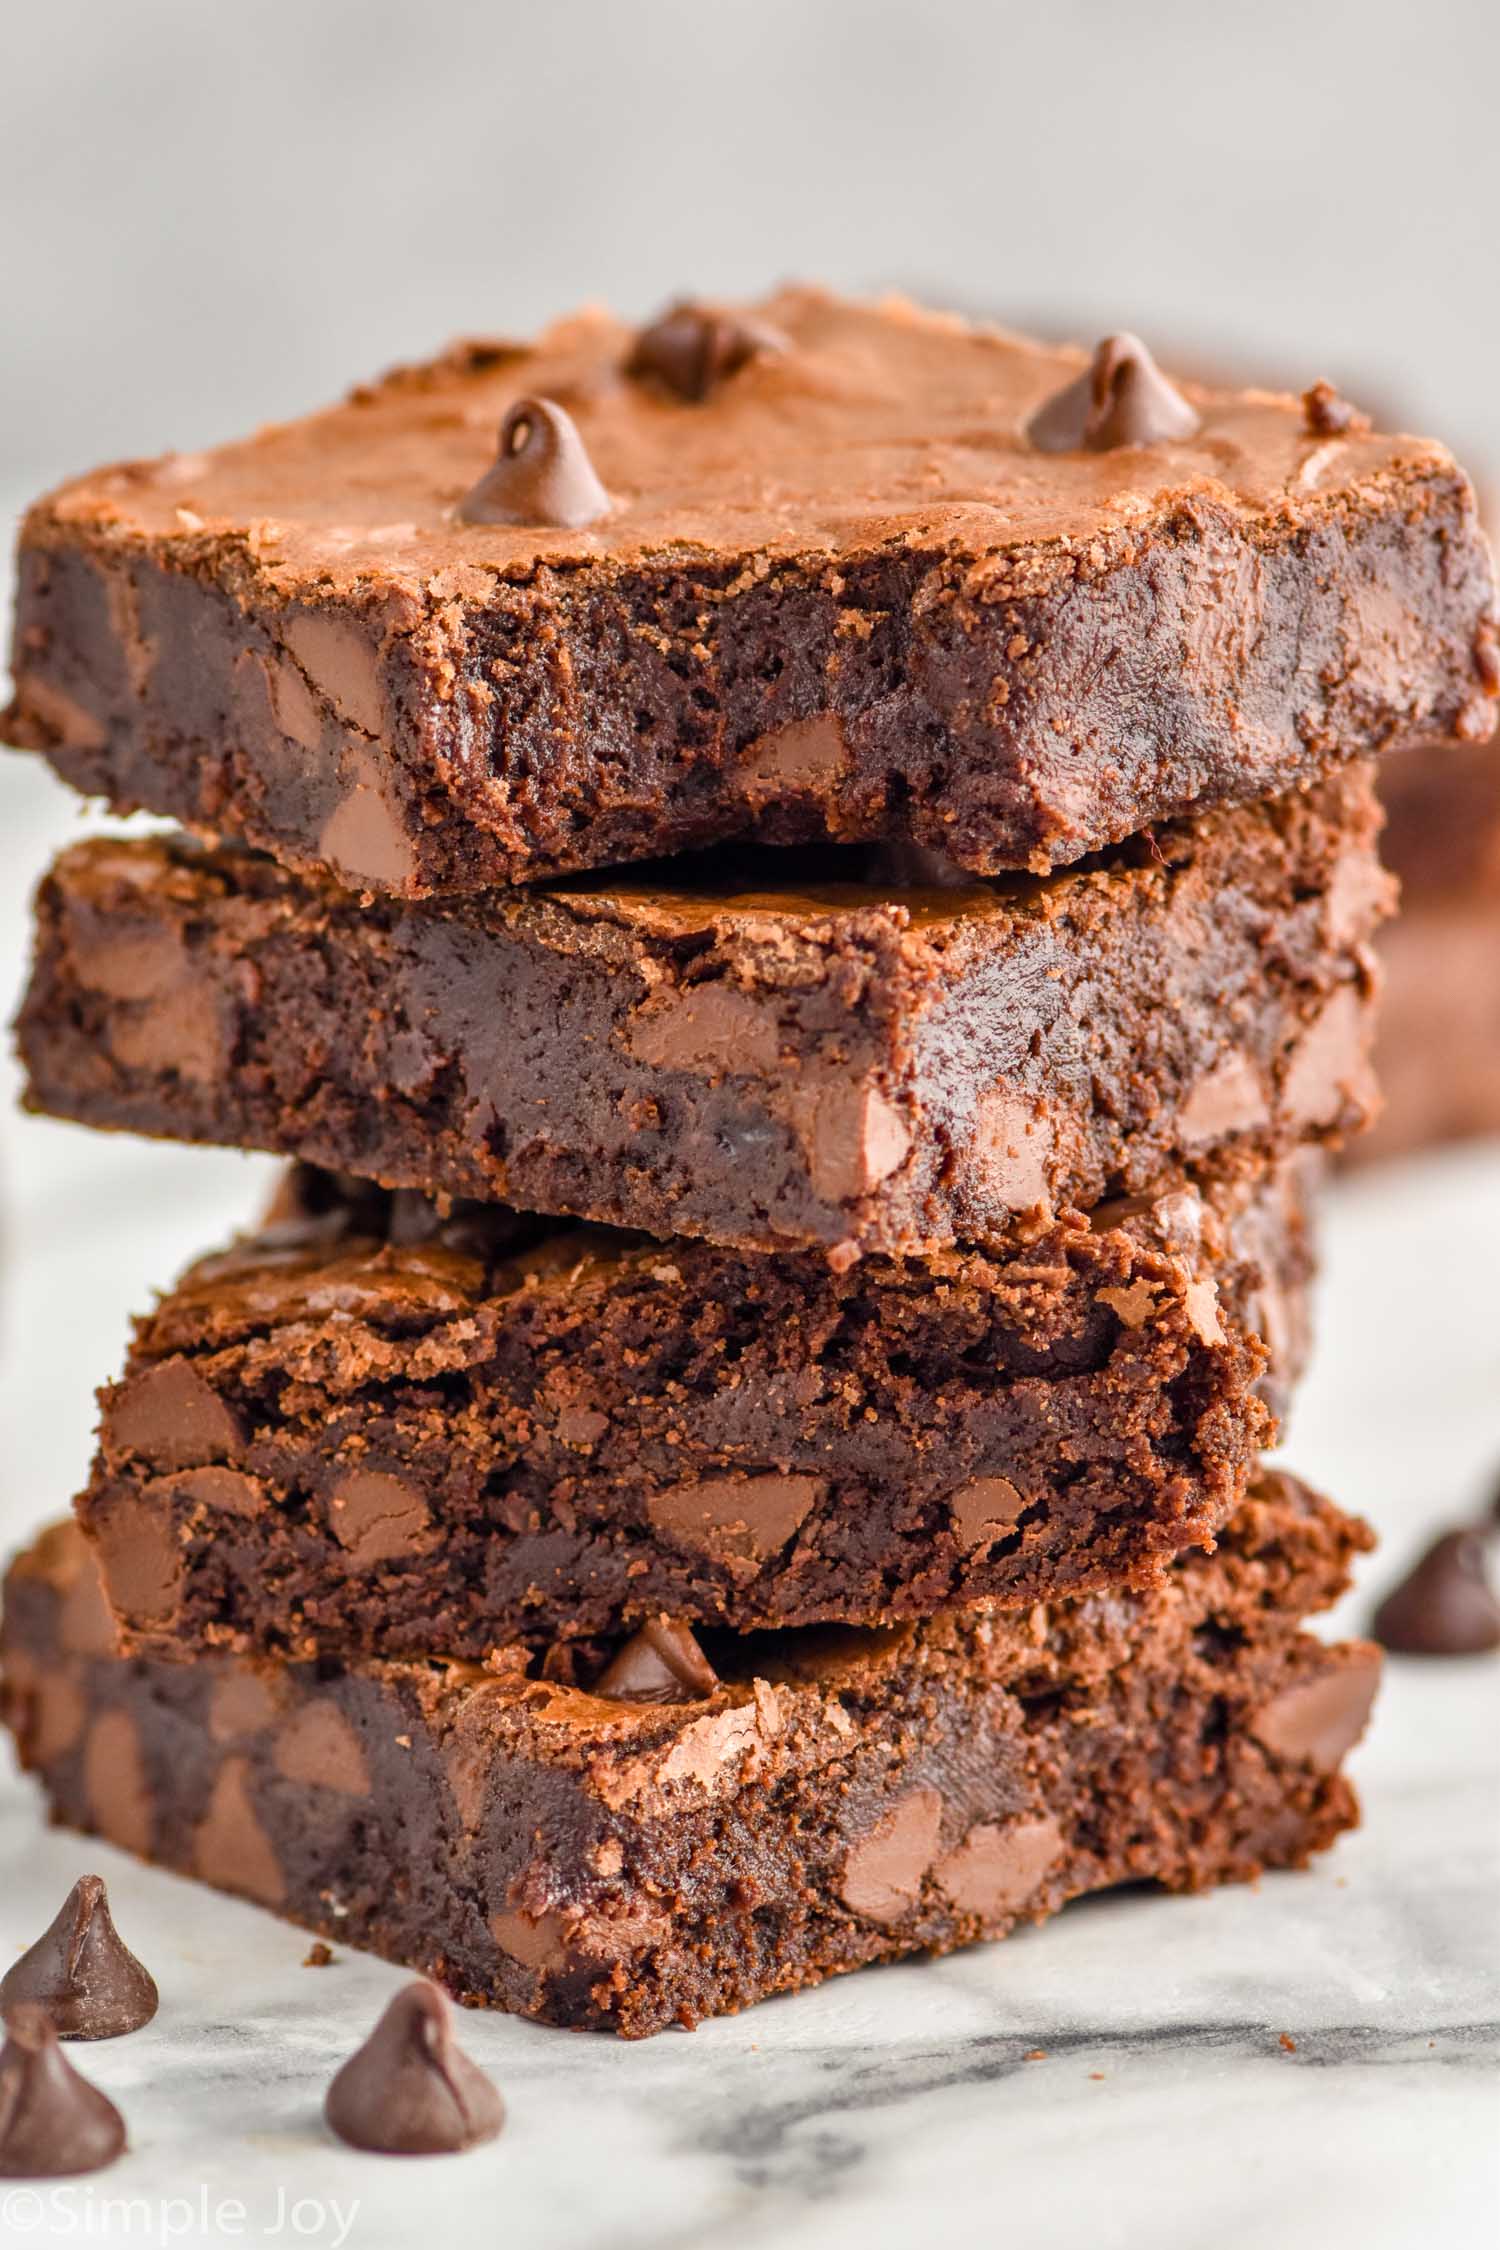 https://www.simplejoy.com/wp-content/uploads/2022/03/death-by-chocolate-brownies.jpg